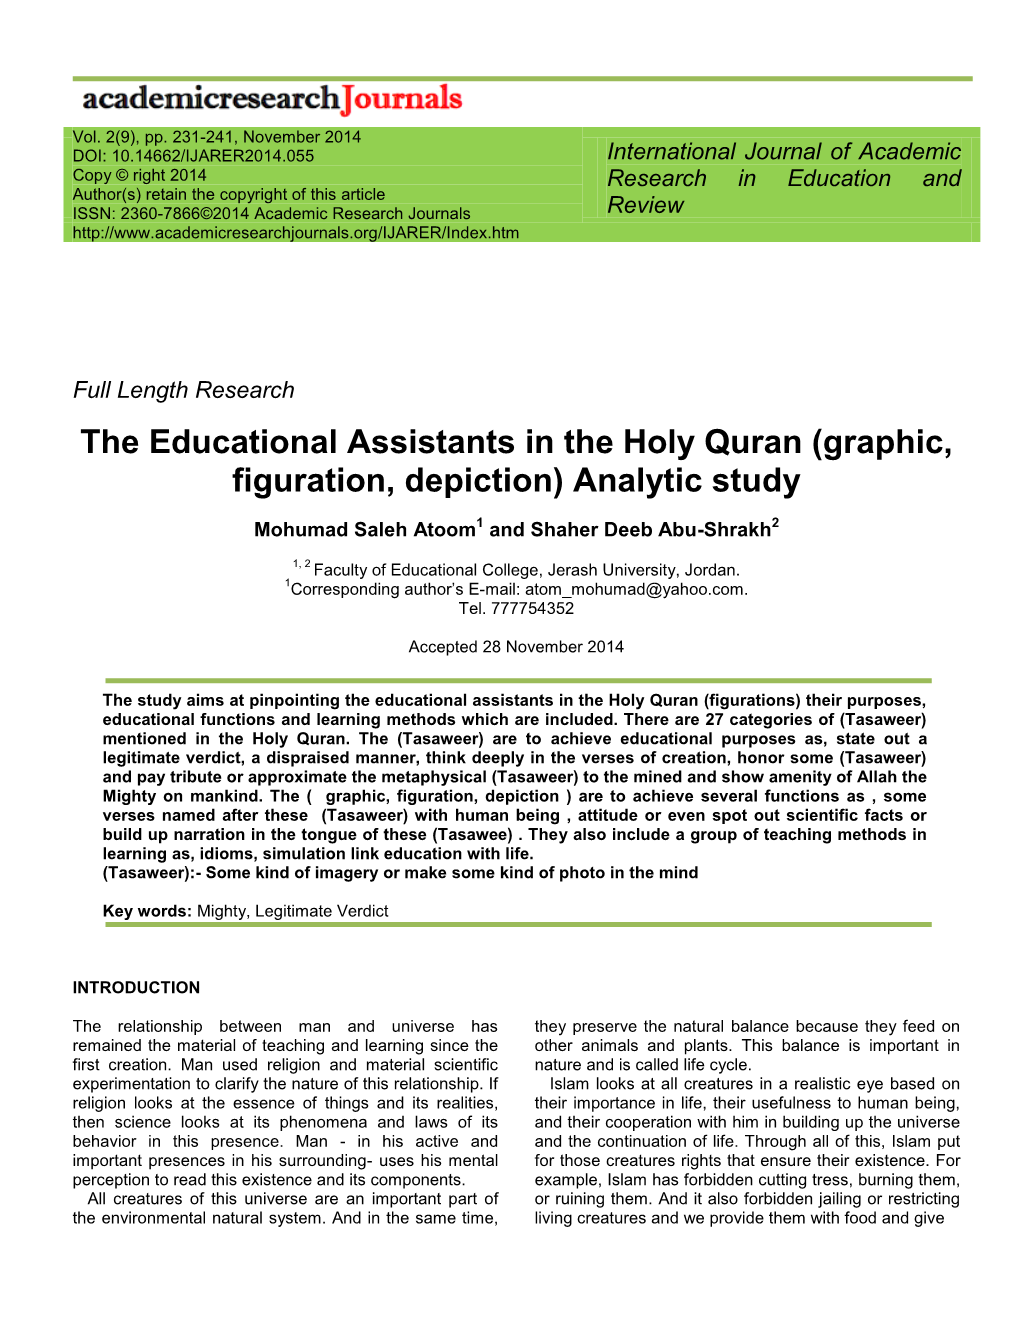 The Educational Assistants in the Holy Quran (Graphic, Figuration, Depiction) Analytic Study